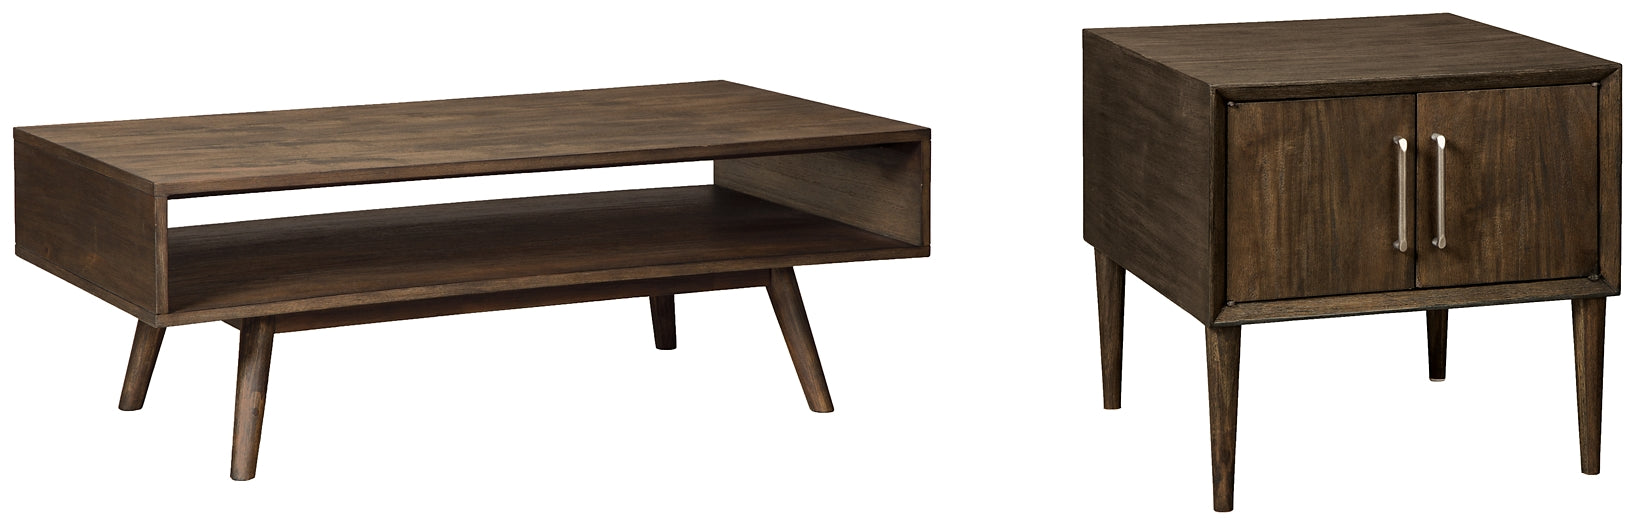 Kisper Coffee Table with 1 End Table at Walker Mattress and Furniture Locations in Cedar Park and Belton TX.